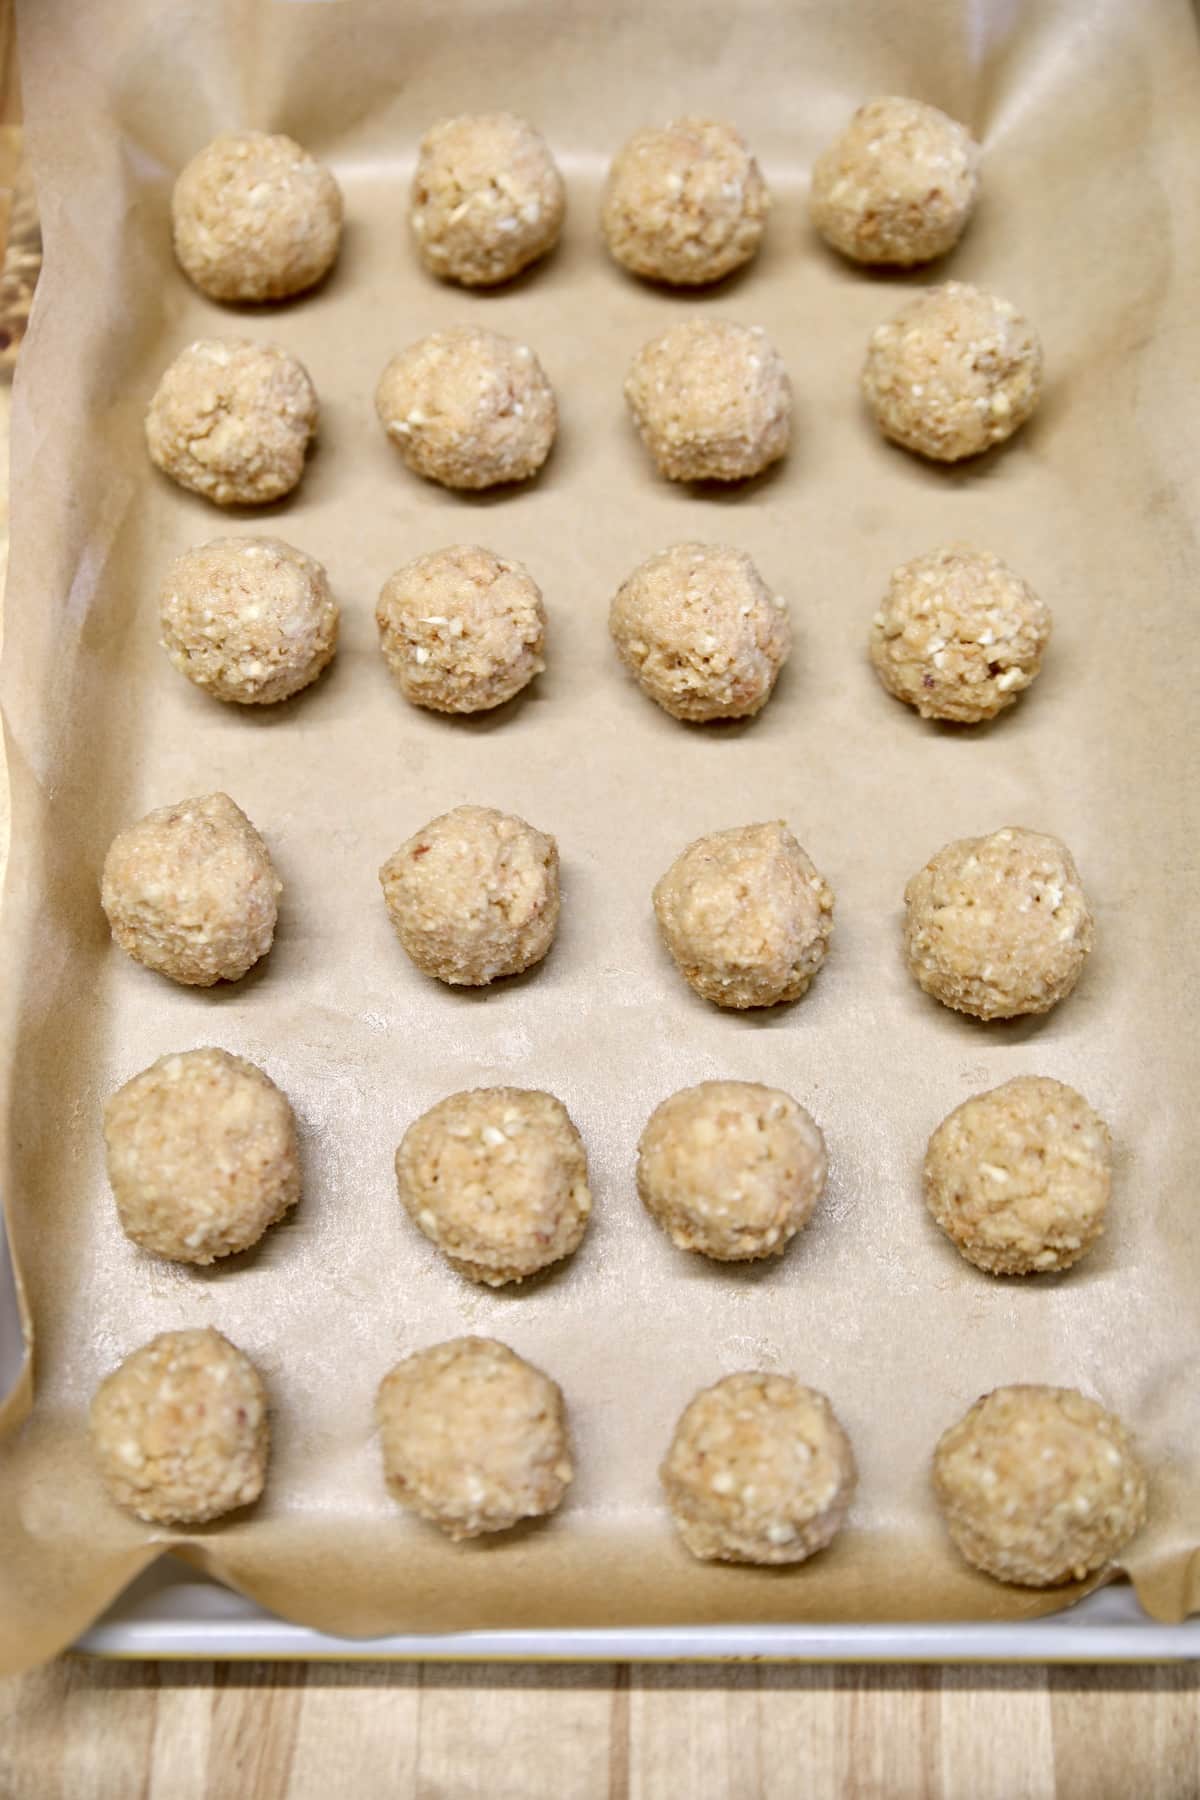 Sheet pan lined with parchment with pecan bourbon balls.